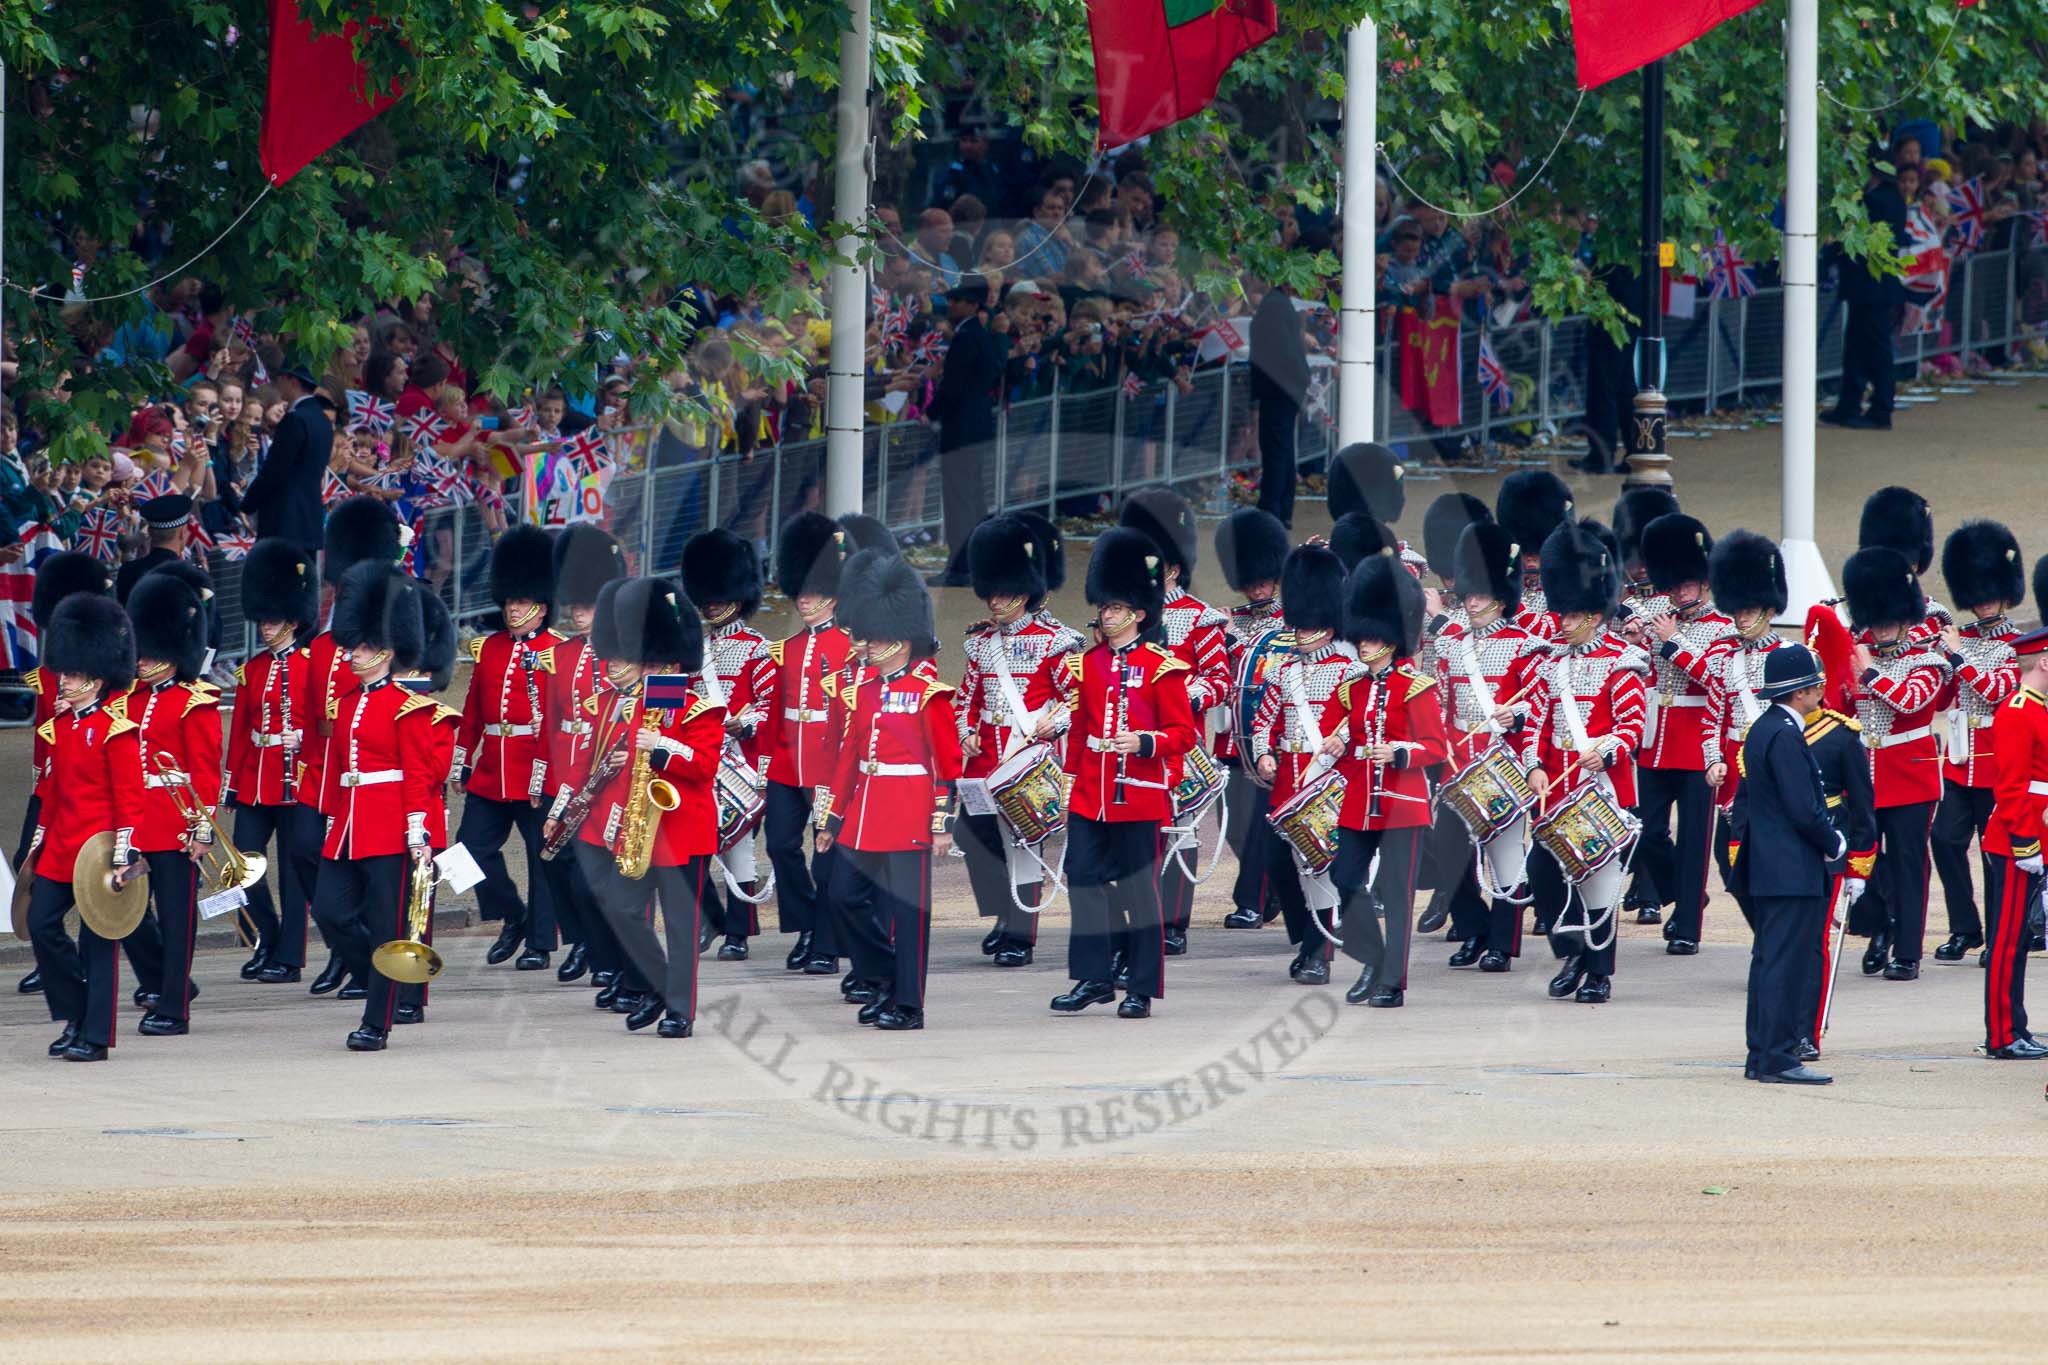 Trooping the Colour 2014.
Horse Guards Parade, Westminster,
London SW1A,

United Kingdom,
on 14 June 2014 at 10:11, image #72